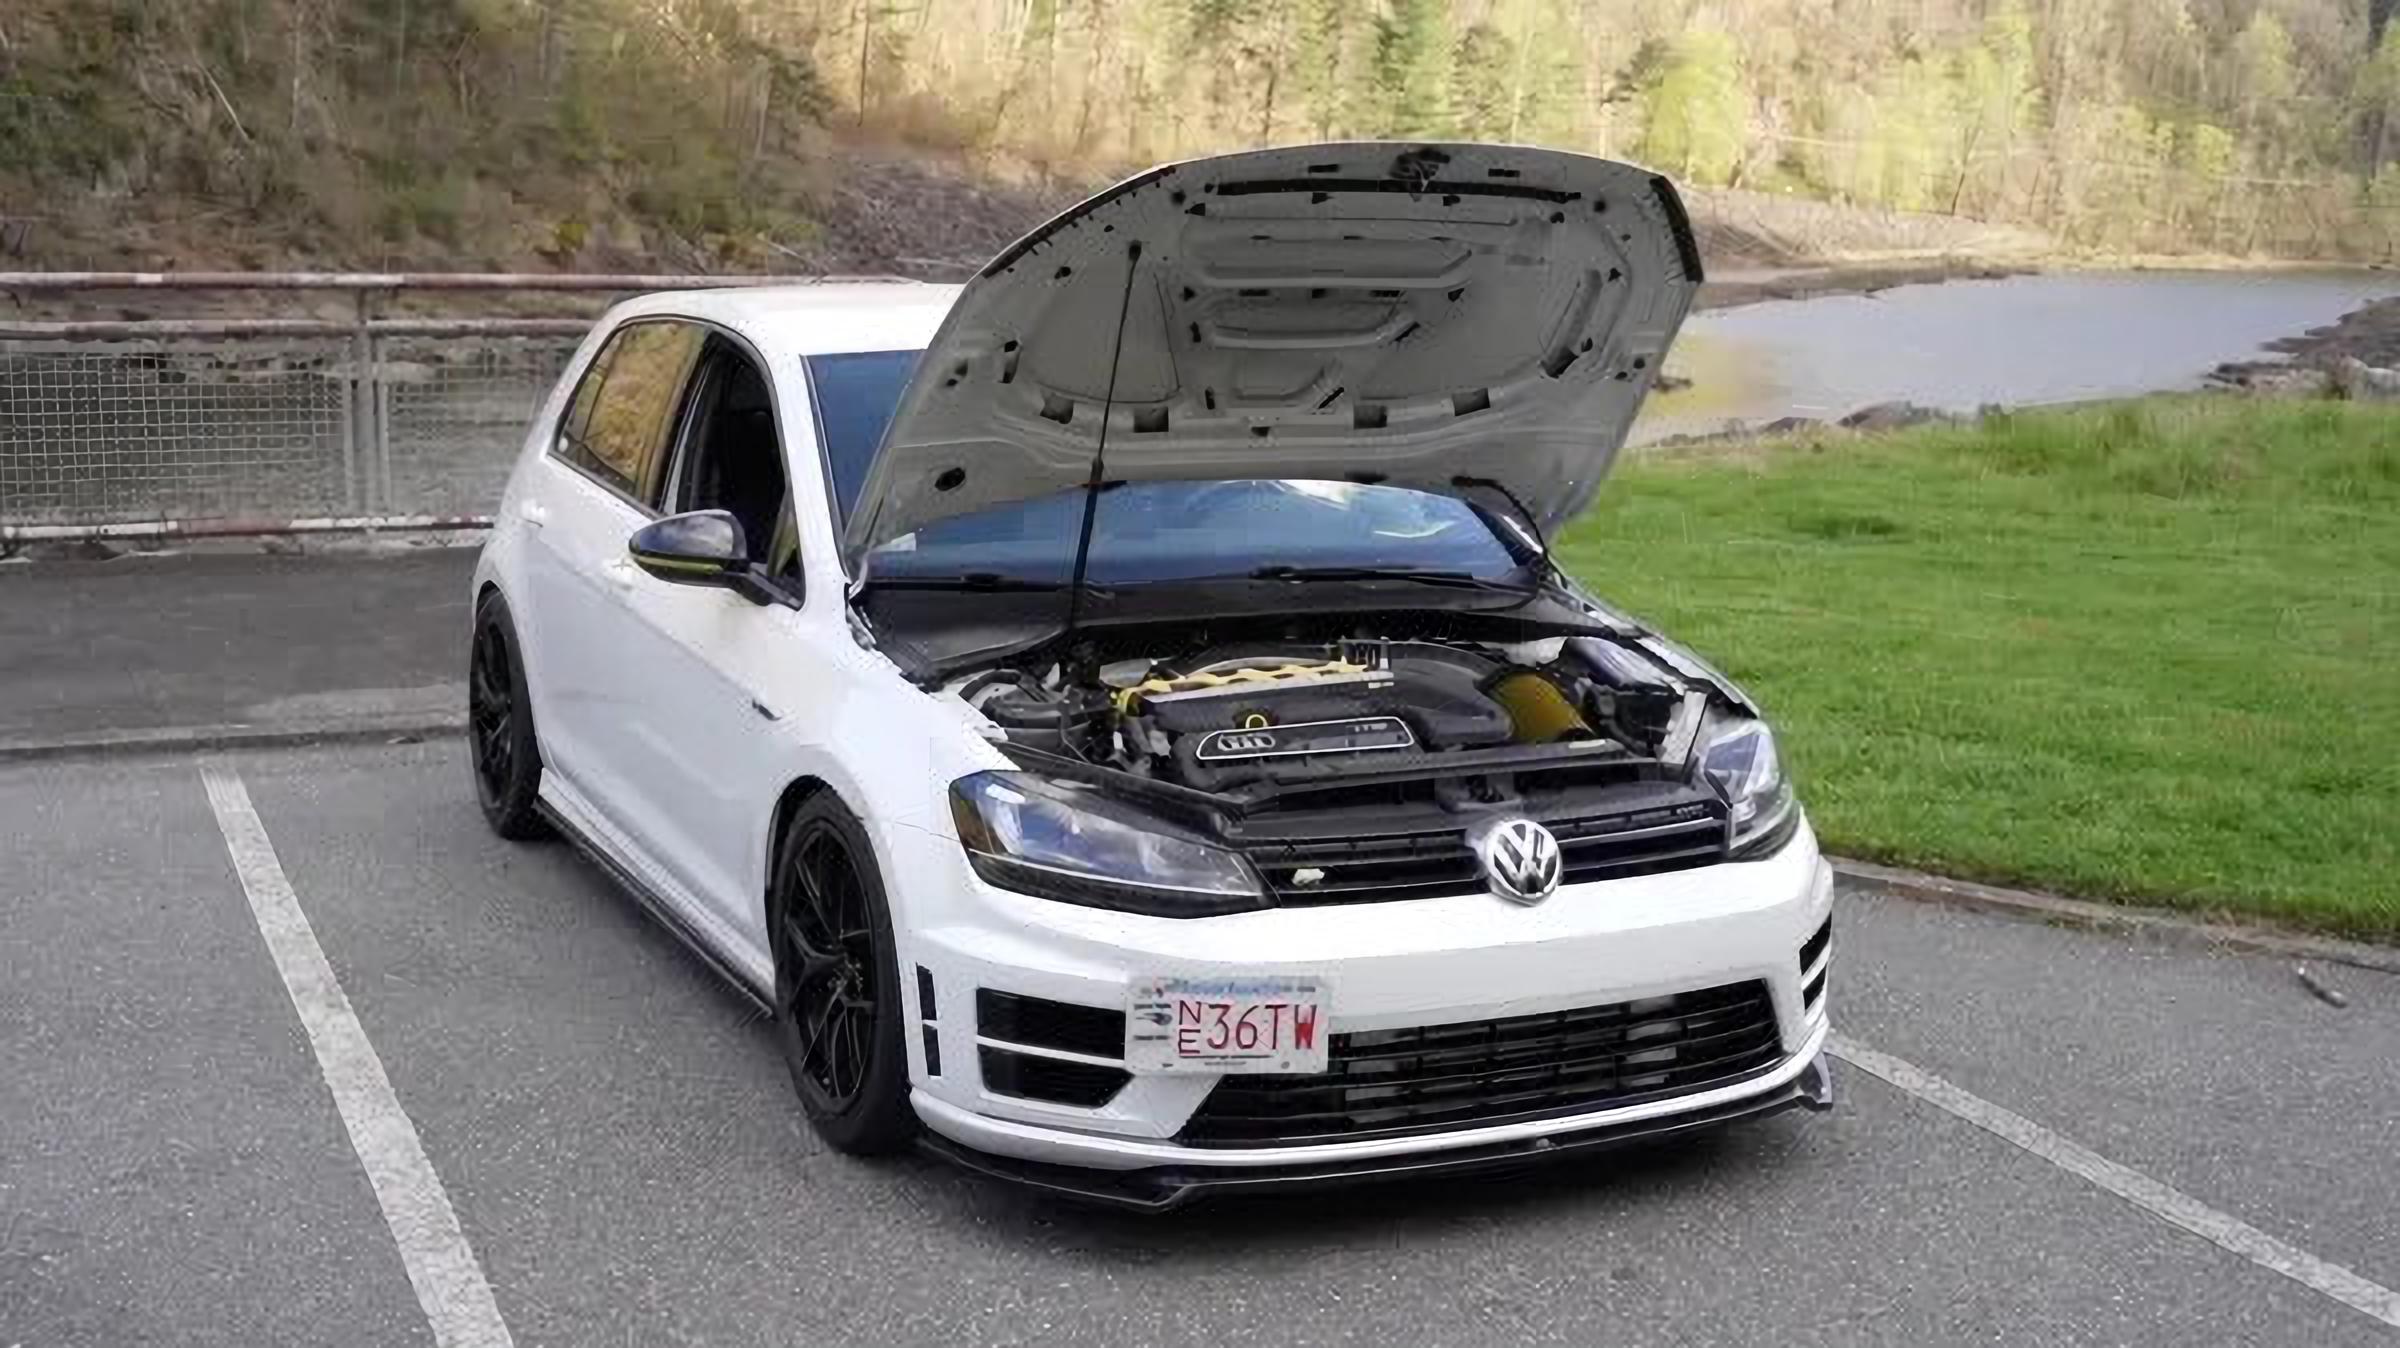 This VW Golf MK 7 Packs a Turbo Audi Surprise Under the Hood, Is an  All-Time Great Sleeper - autoevolution